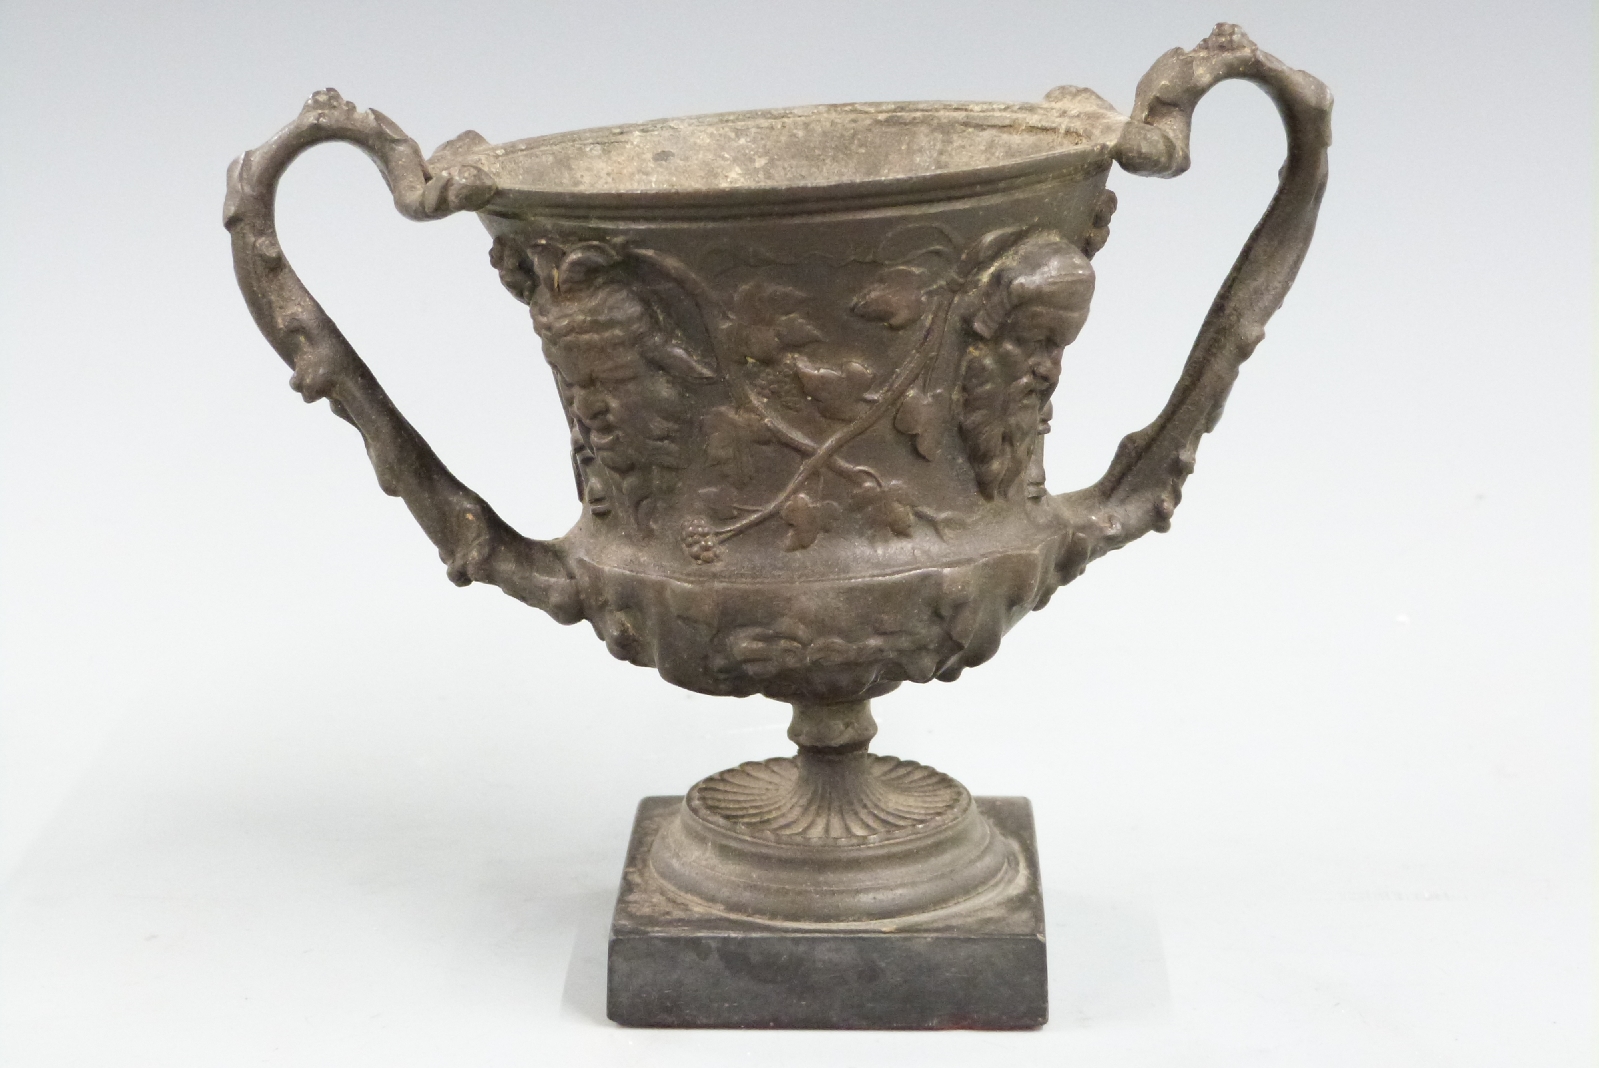 Spelter miniature twin handled vase or urn with mask and foliate decoration, on square slate or